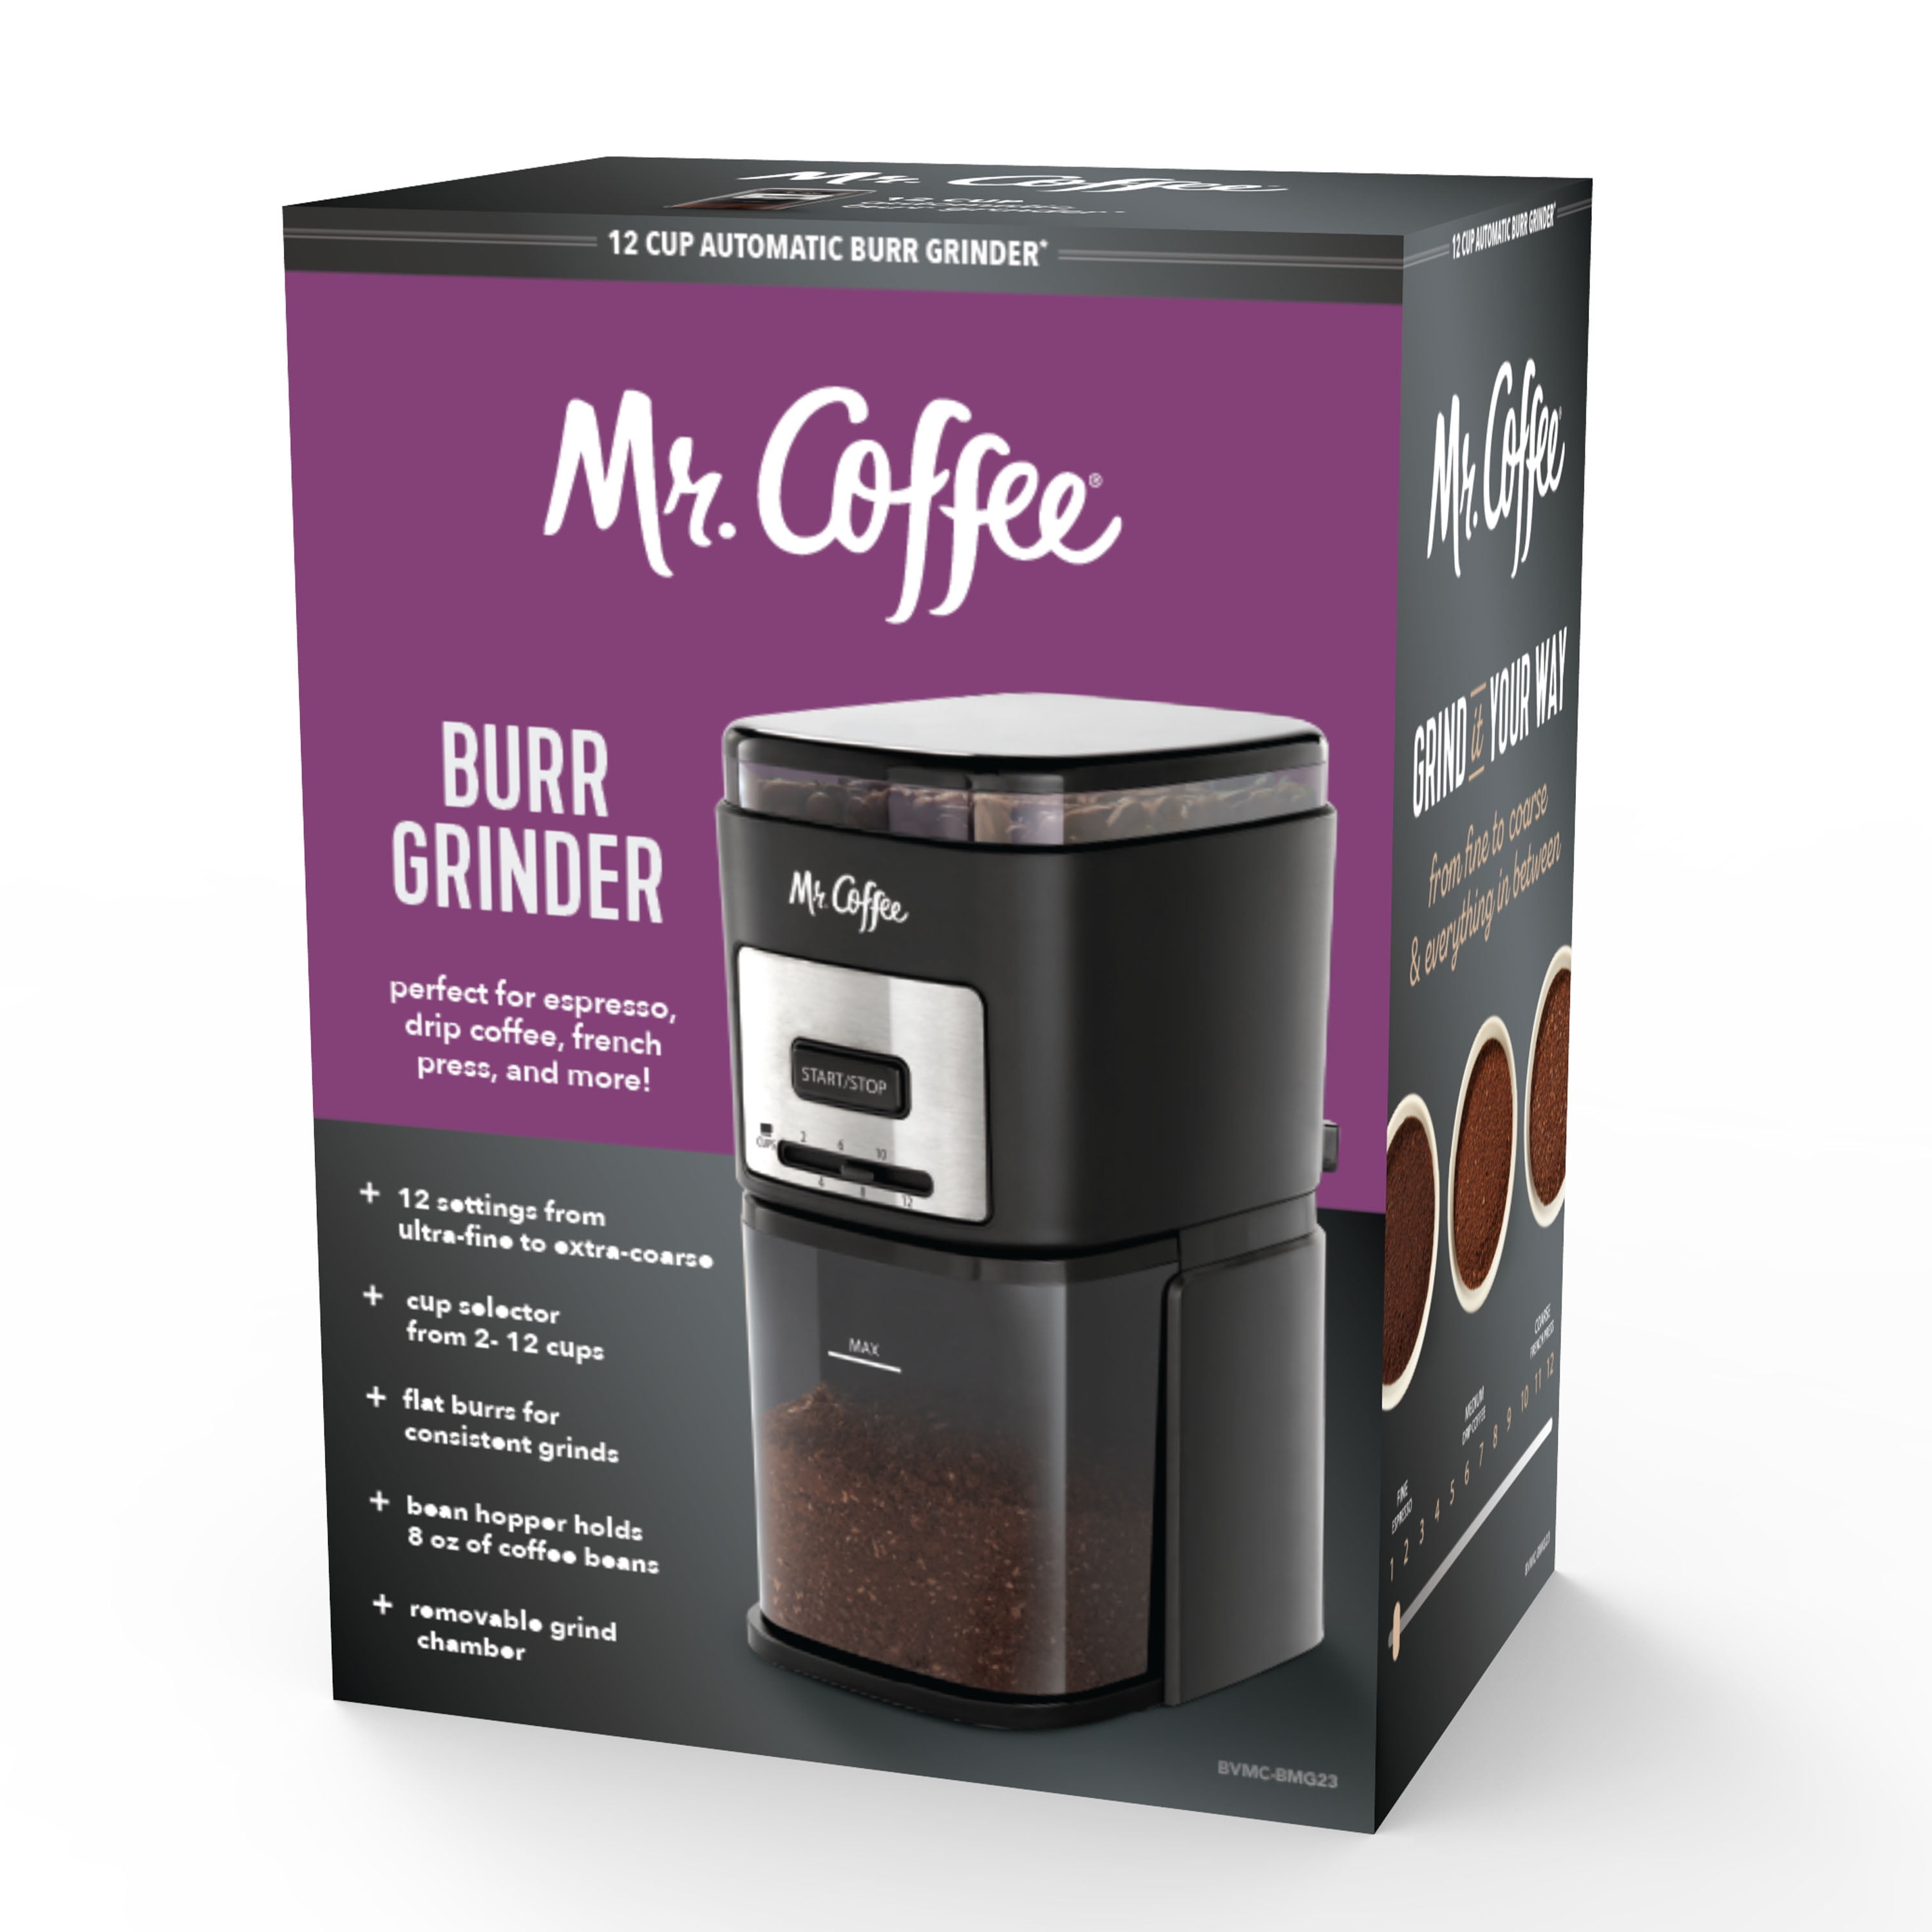 Mr. Coffee undefined at